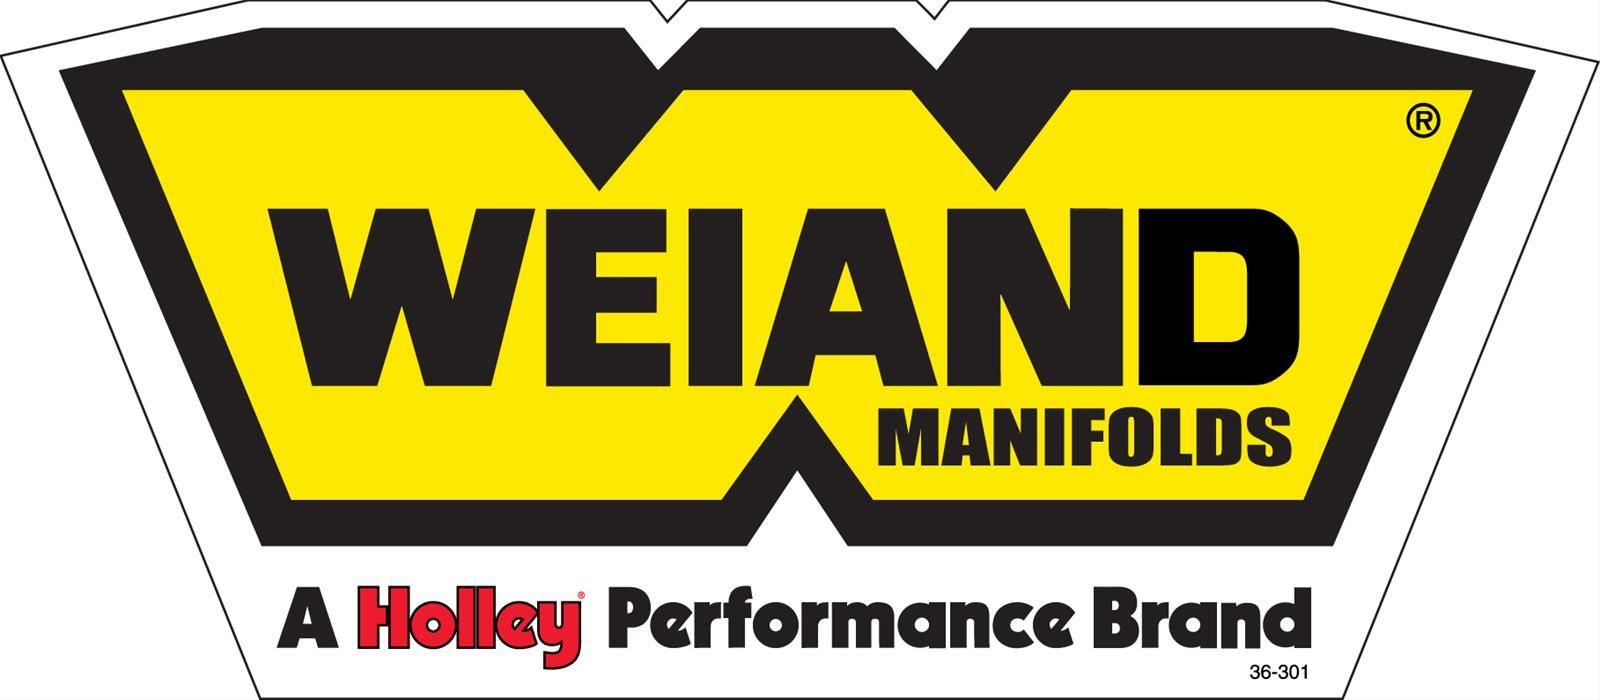 Weiand Logo - Details about Weiand 36-301 Decal Vinyl Weiand Manifolds Logo Yellow Black  Each